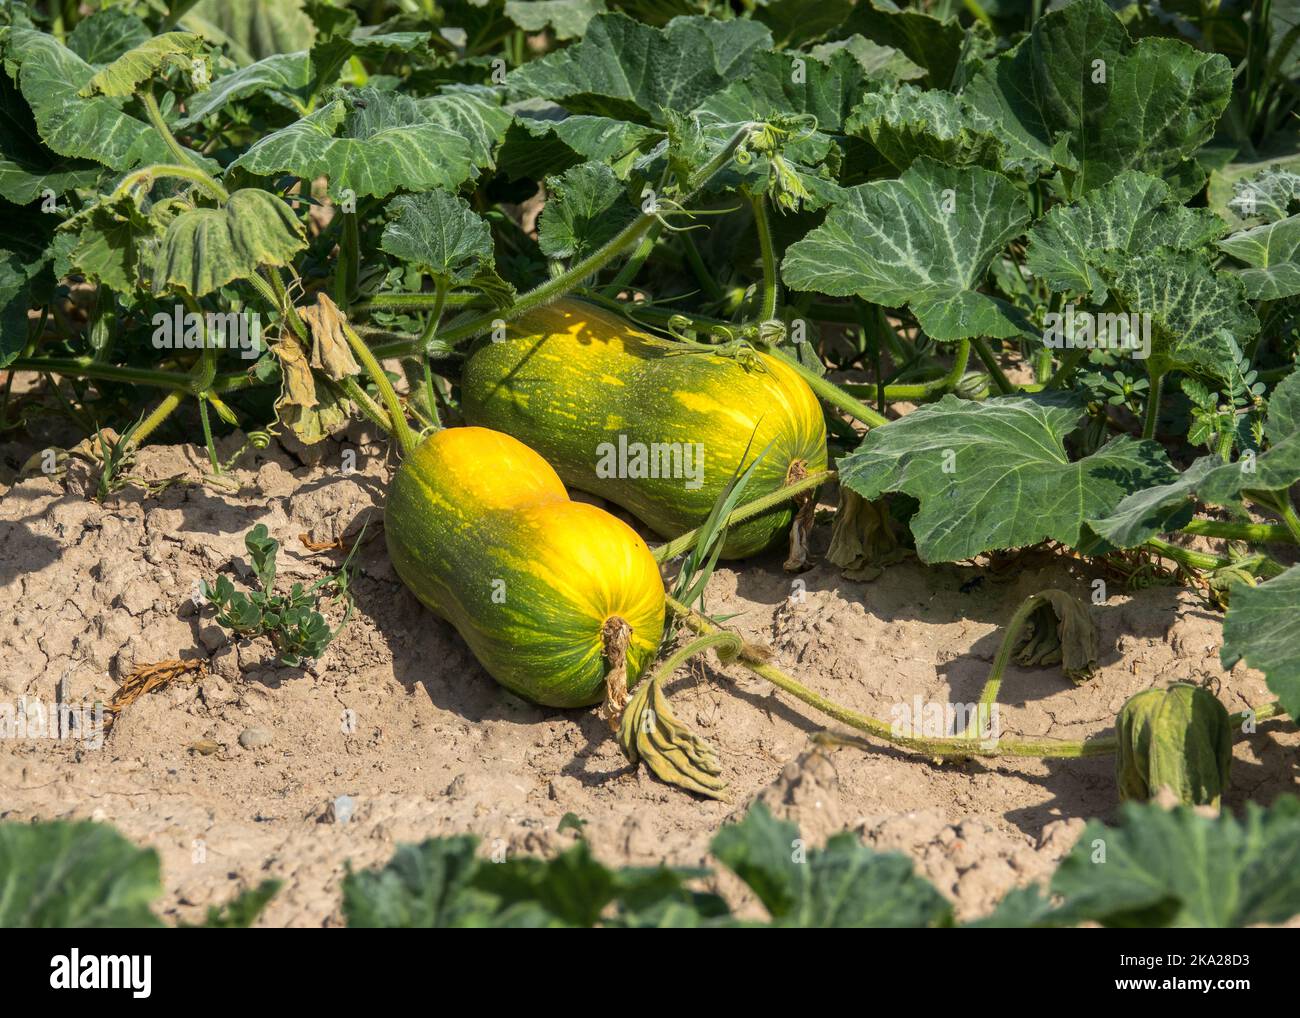 gourd, calabash, cucurbit entire plant with root and flowers, creeping plant on the ground Stock Photo